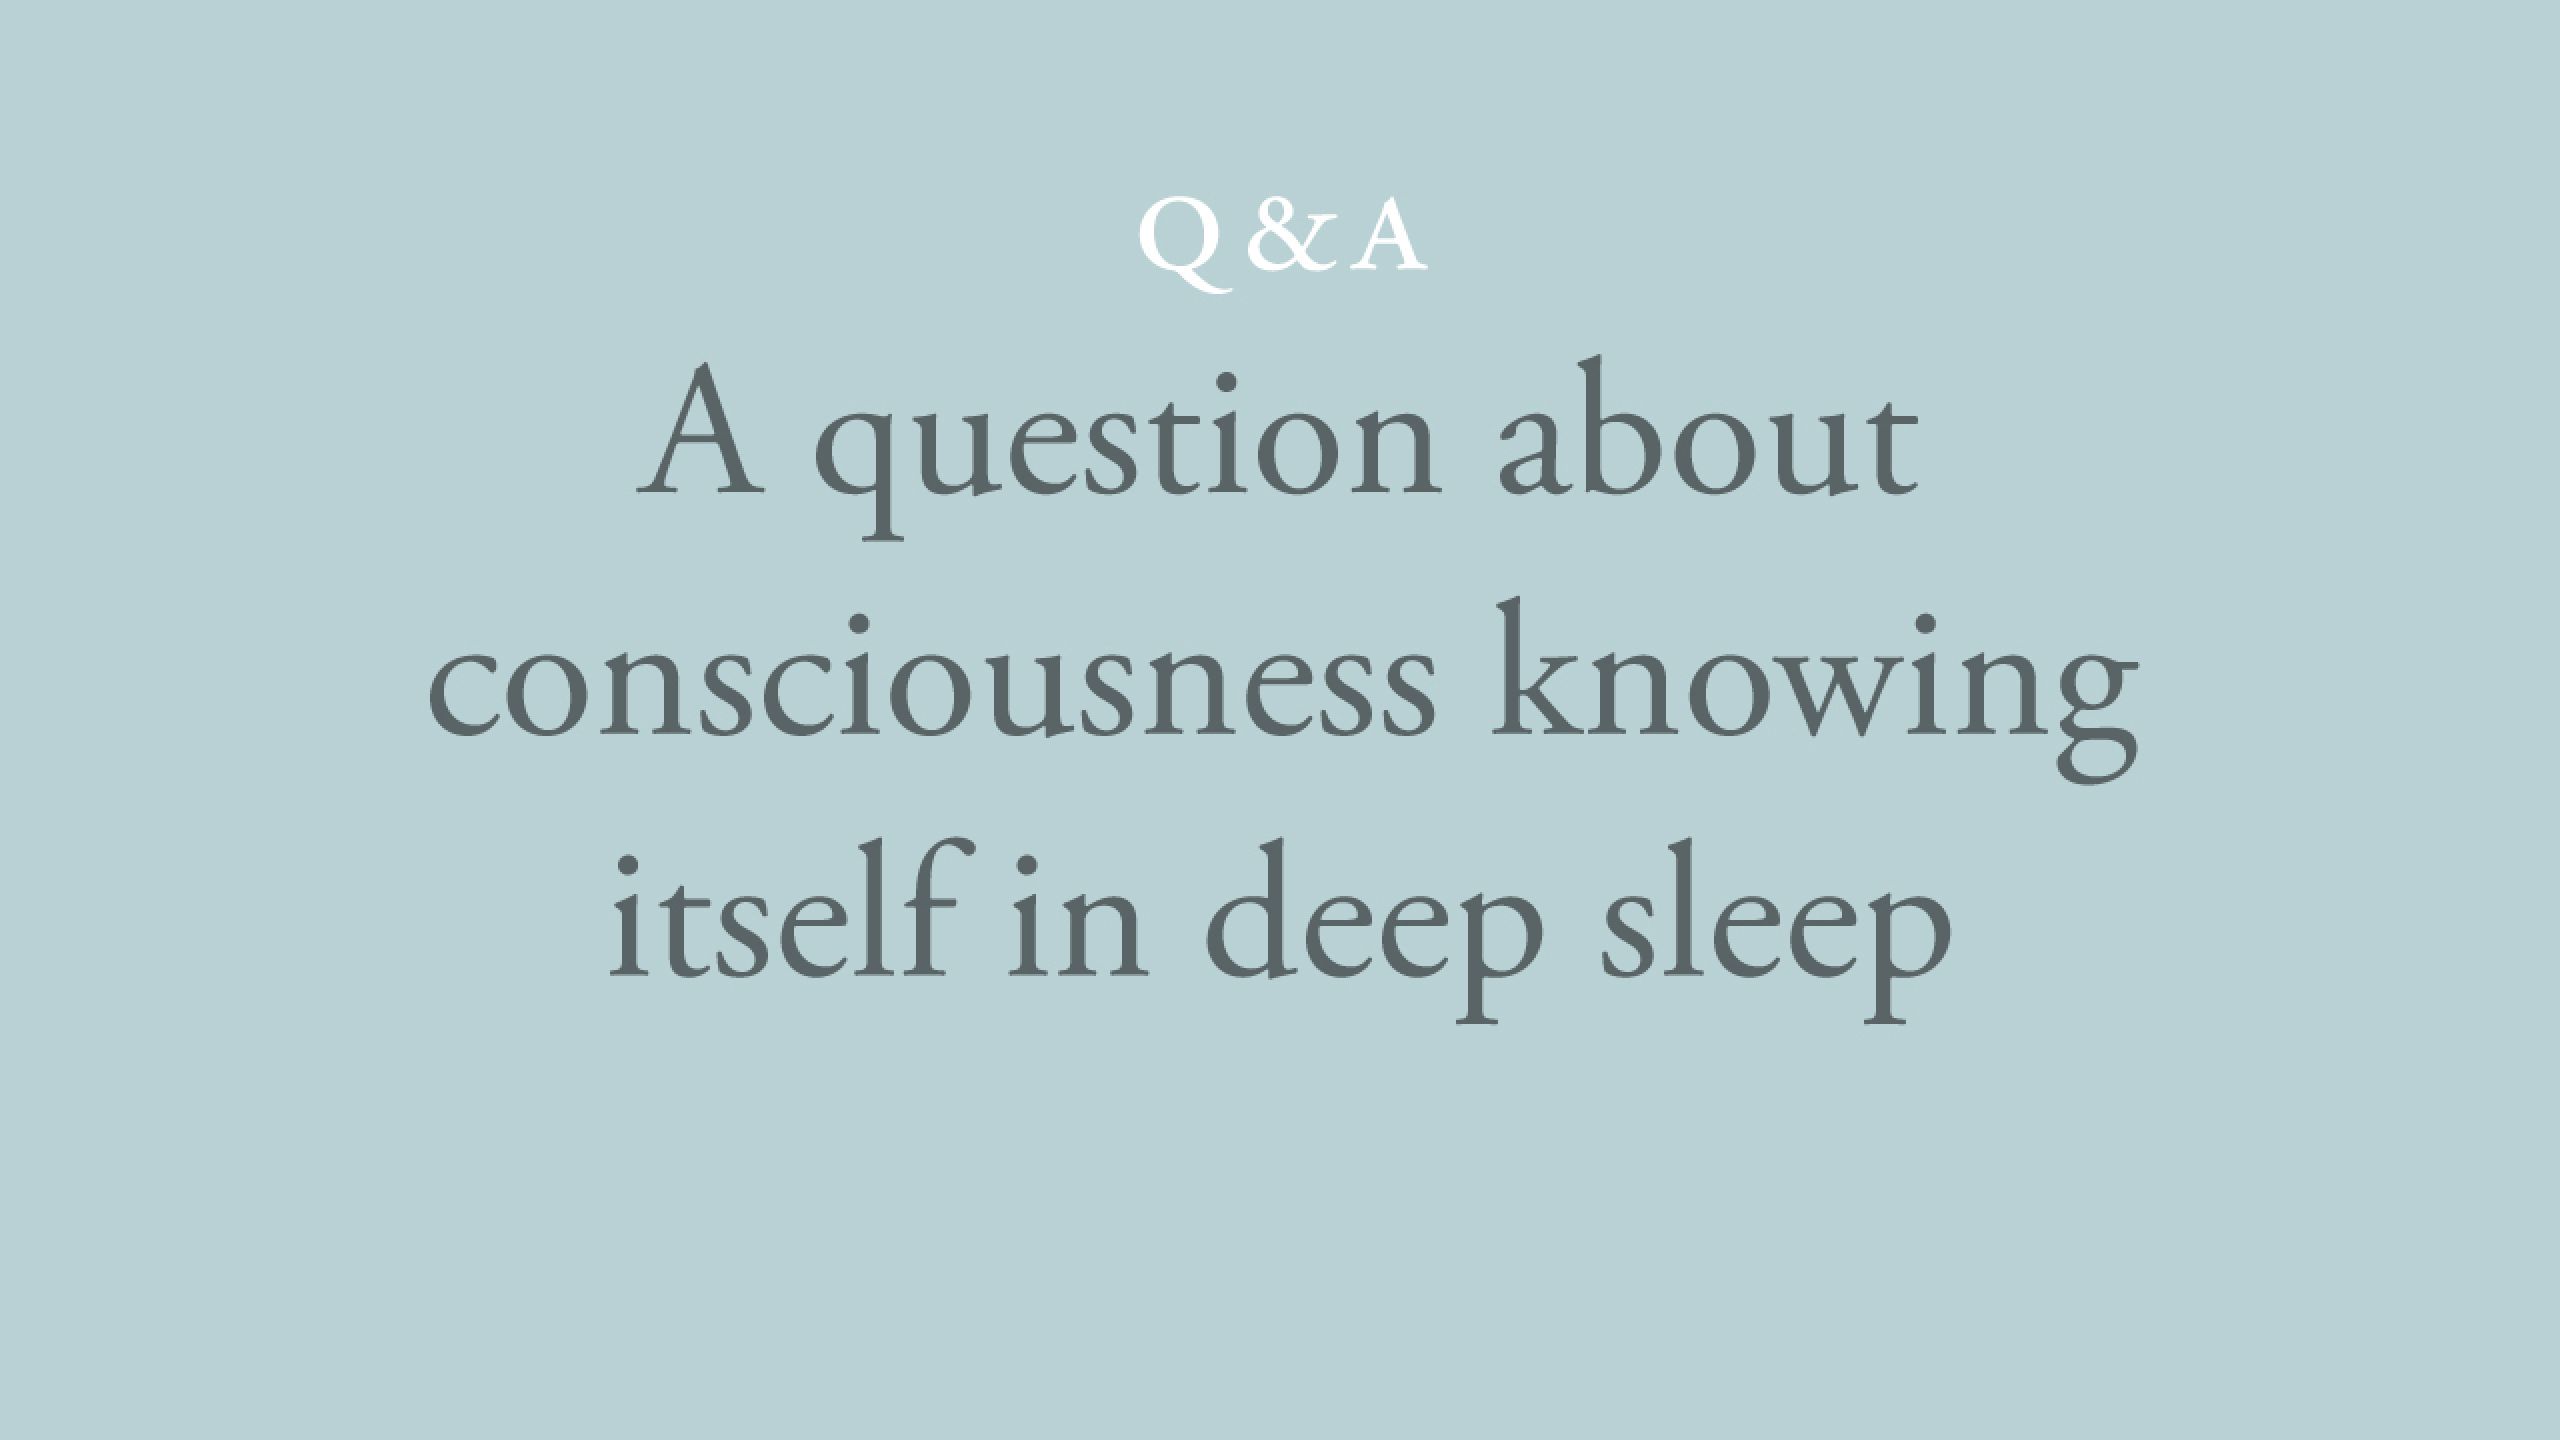 Does consciousness know itself in deep sleep?